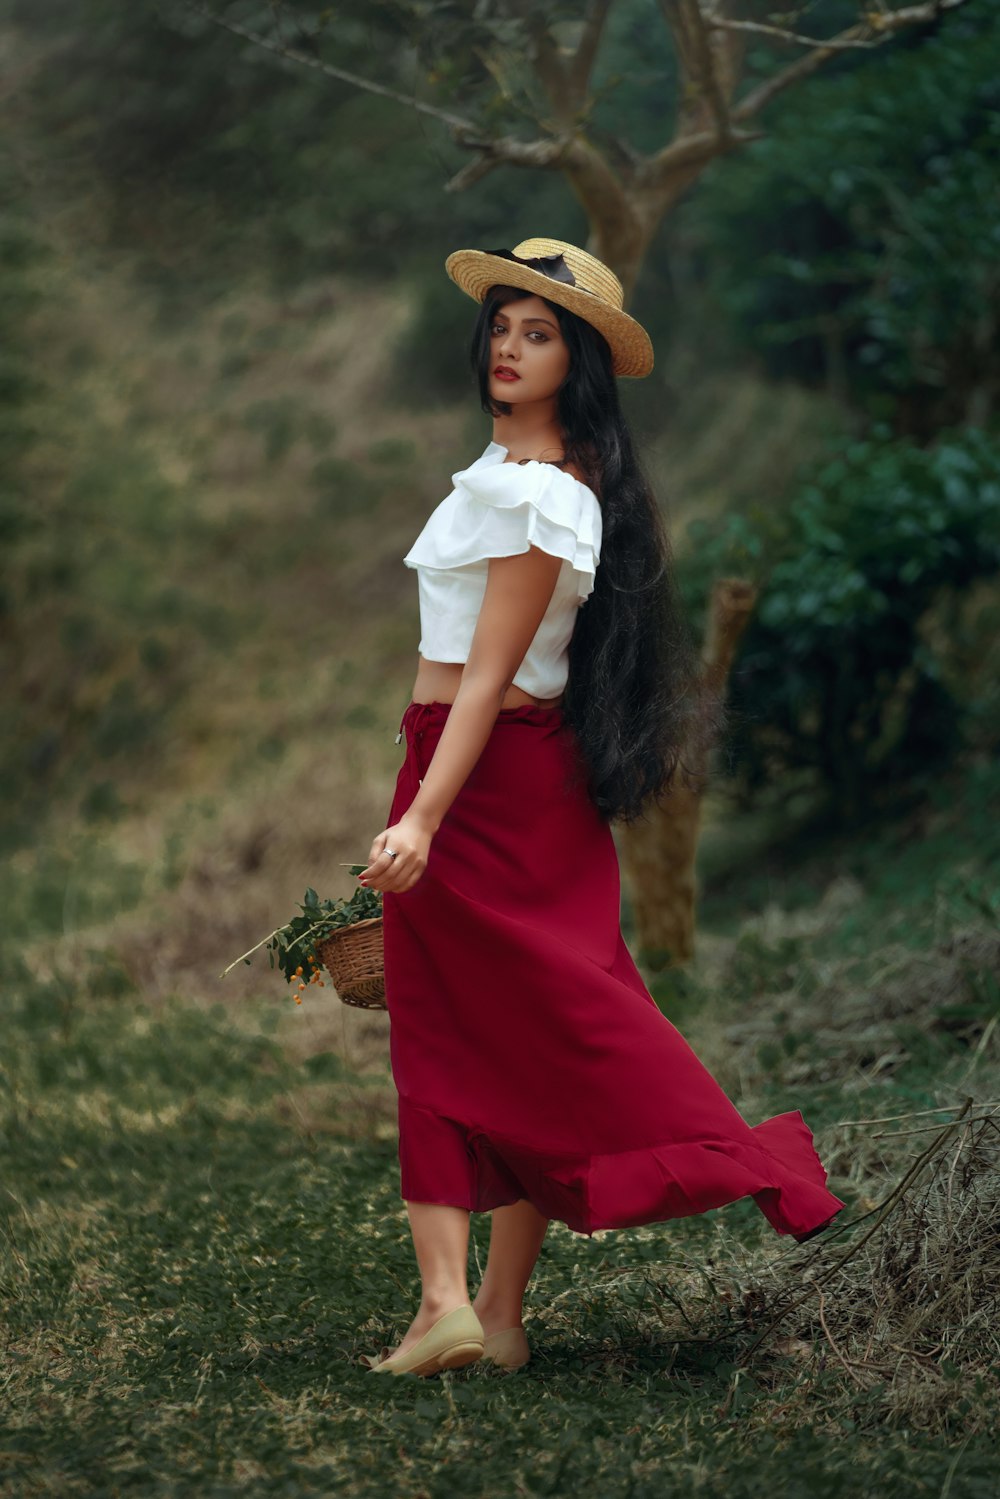 woman in white shirt and red skirt holding brown woven basket